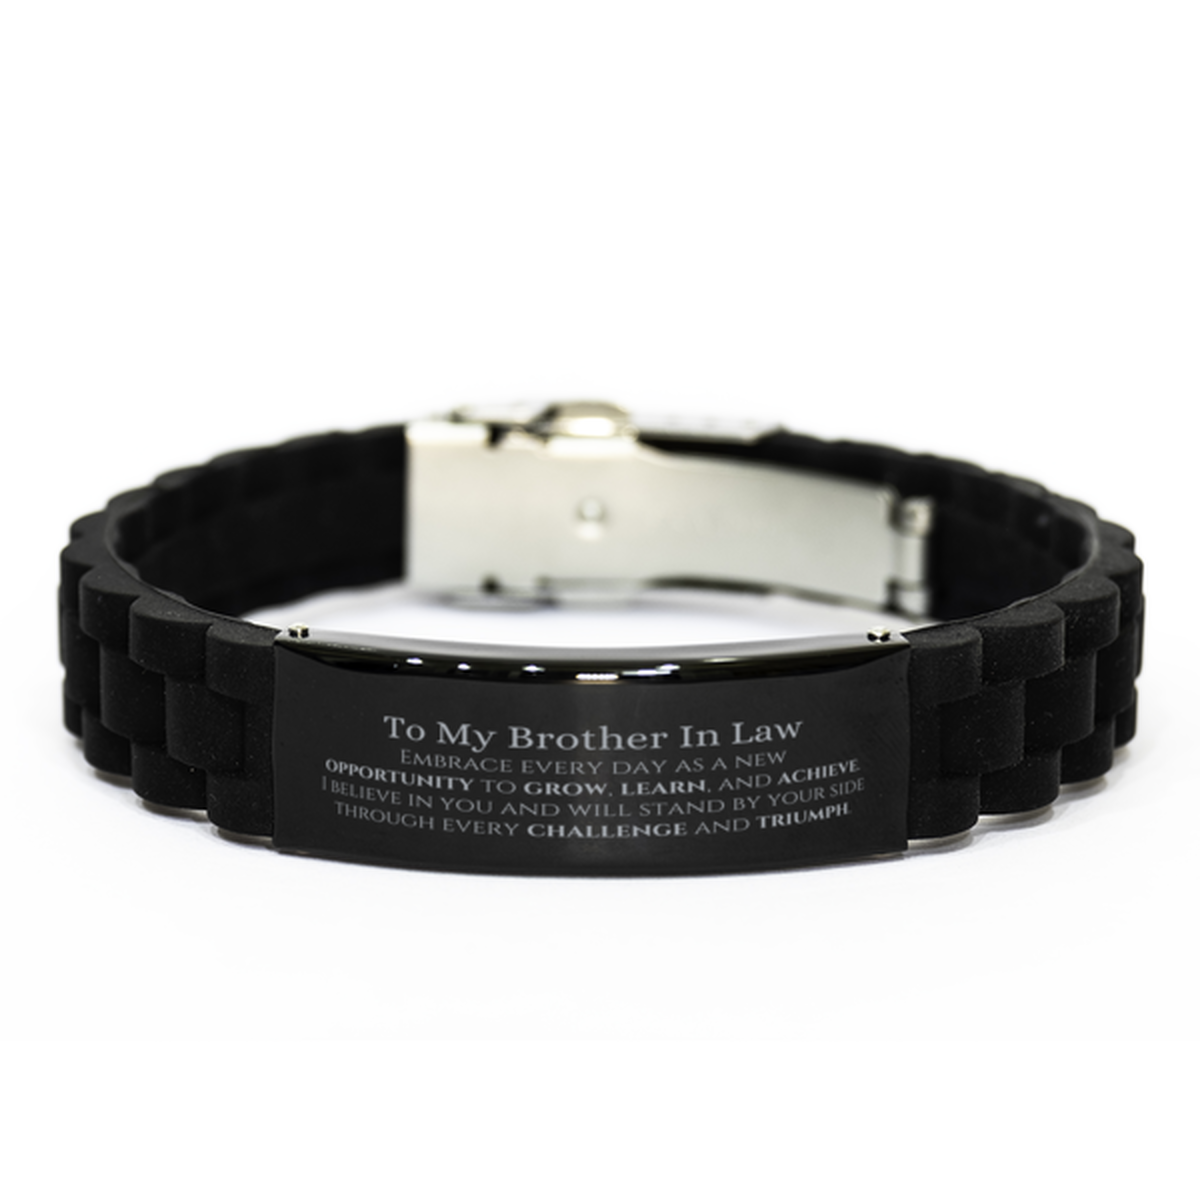 To My Brother In Law Gifts, I believe in you and will stand by your side, Inspirational Black Glidelock Clasp Bracelet For Brother In Law, Birthday Christmas Motivational Brother In Law Gifts